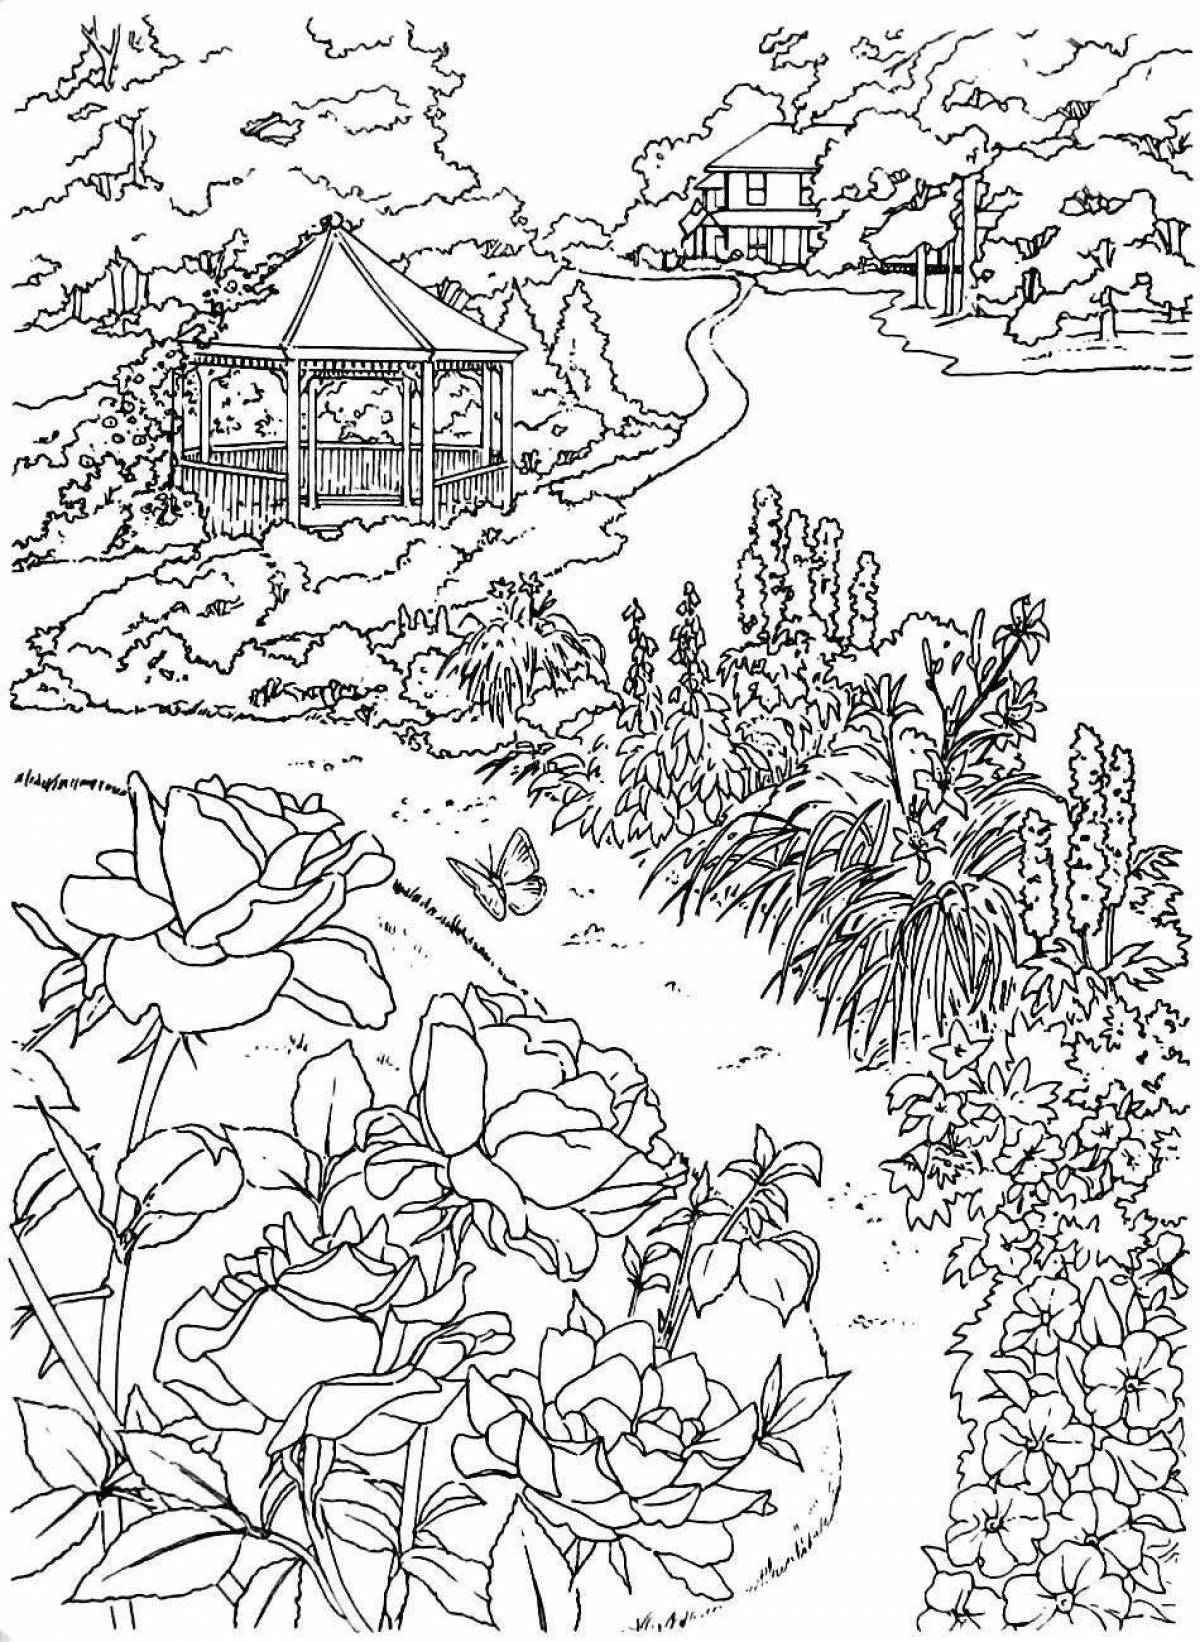 Adorable landscape coloring book for adults